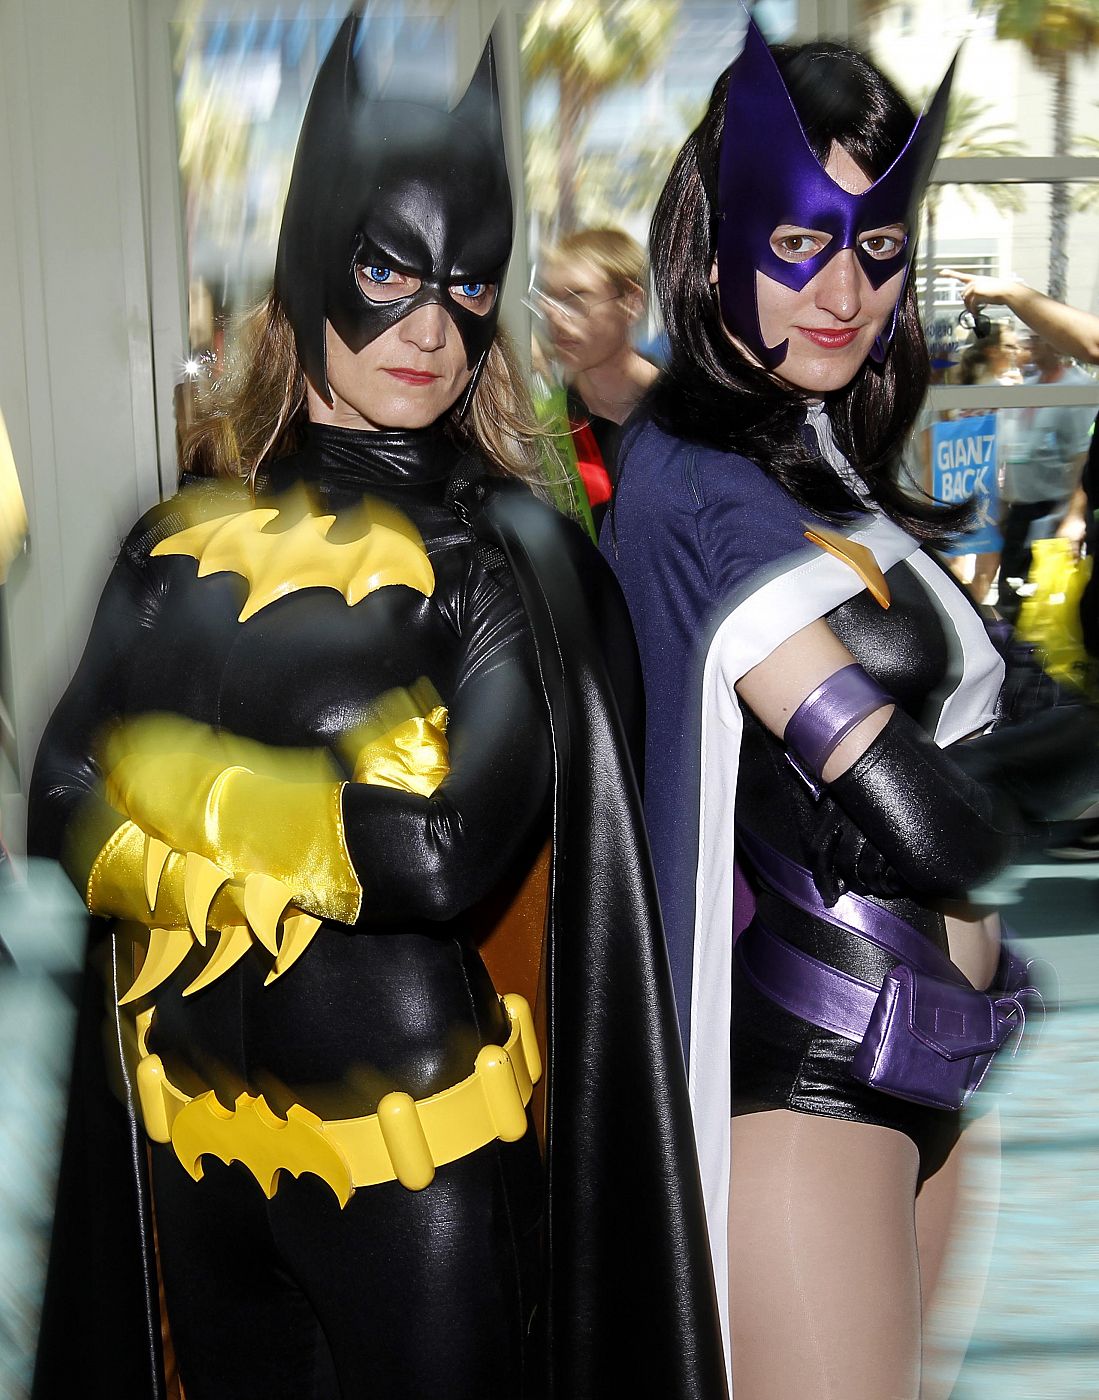 Attendees in costume arrive for the third day of the pop culture convention Comic Con in San Diego